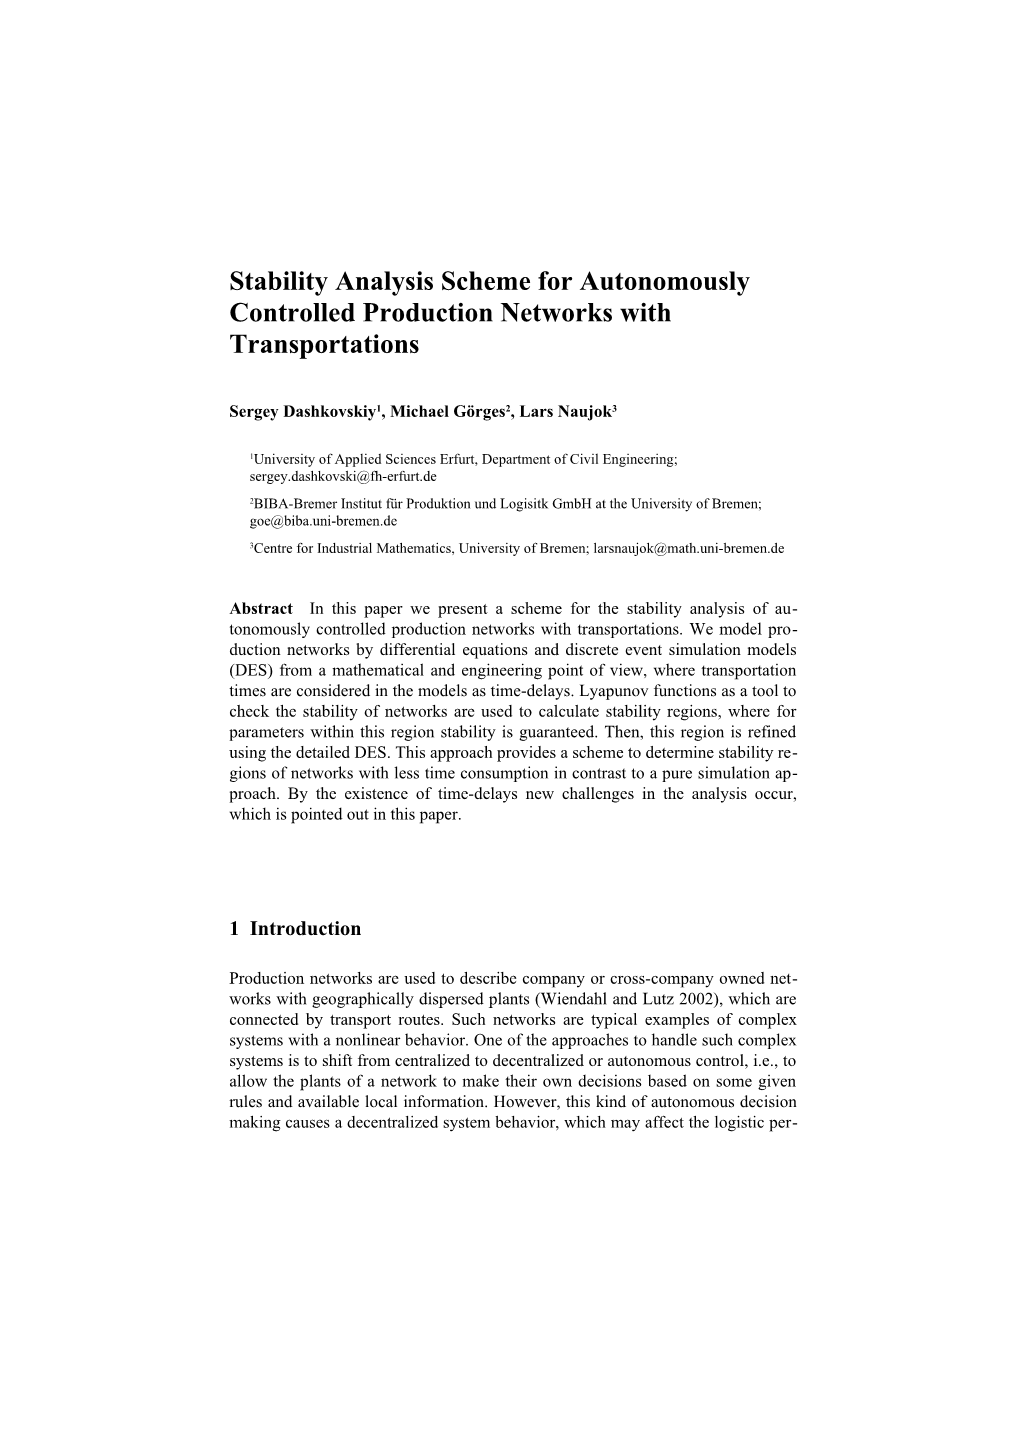 Stability Analysis Scheme for Autonomouslycontrolledproductionnetworks with Transportations